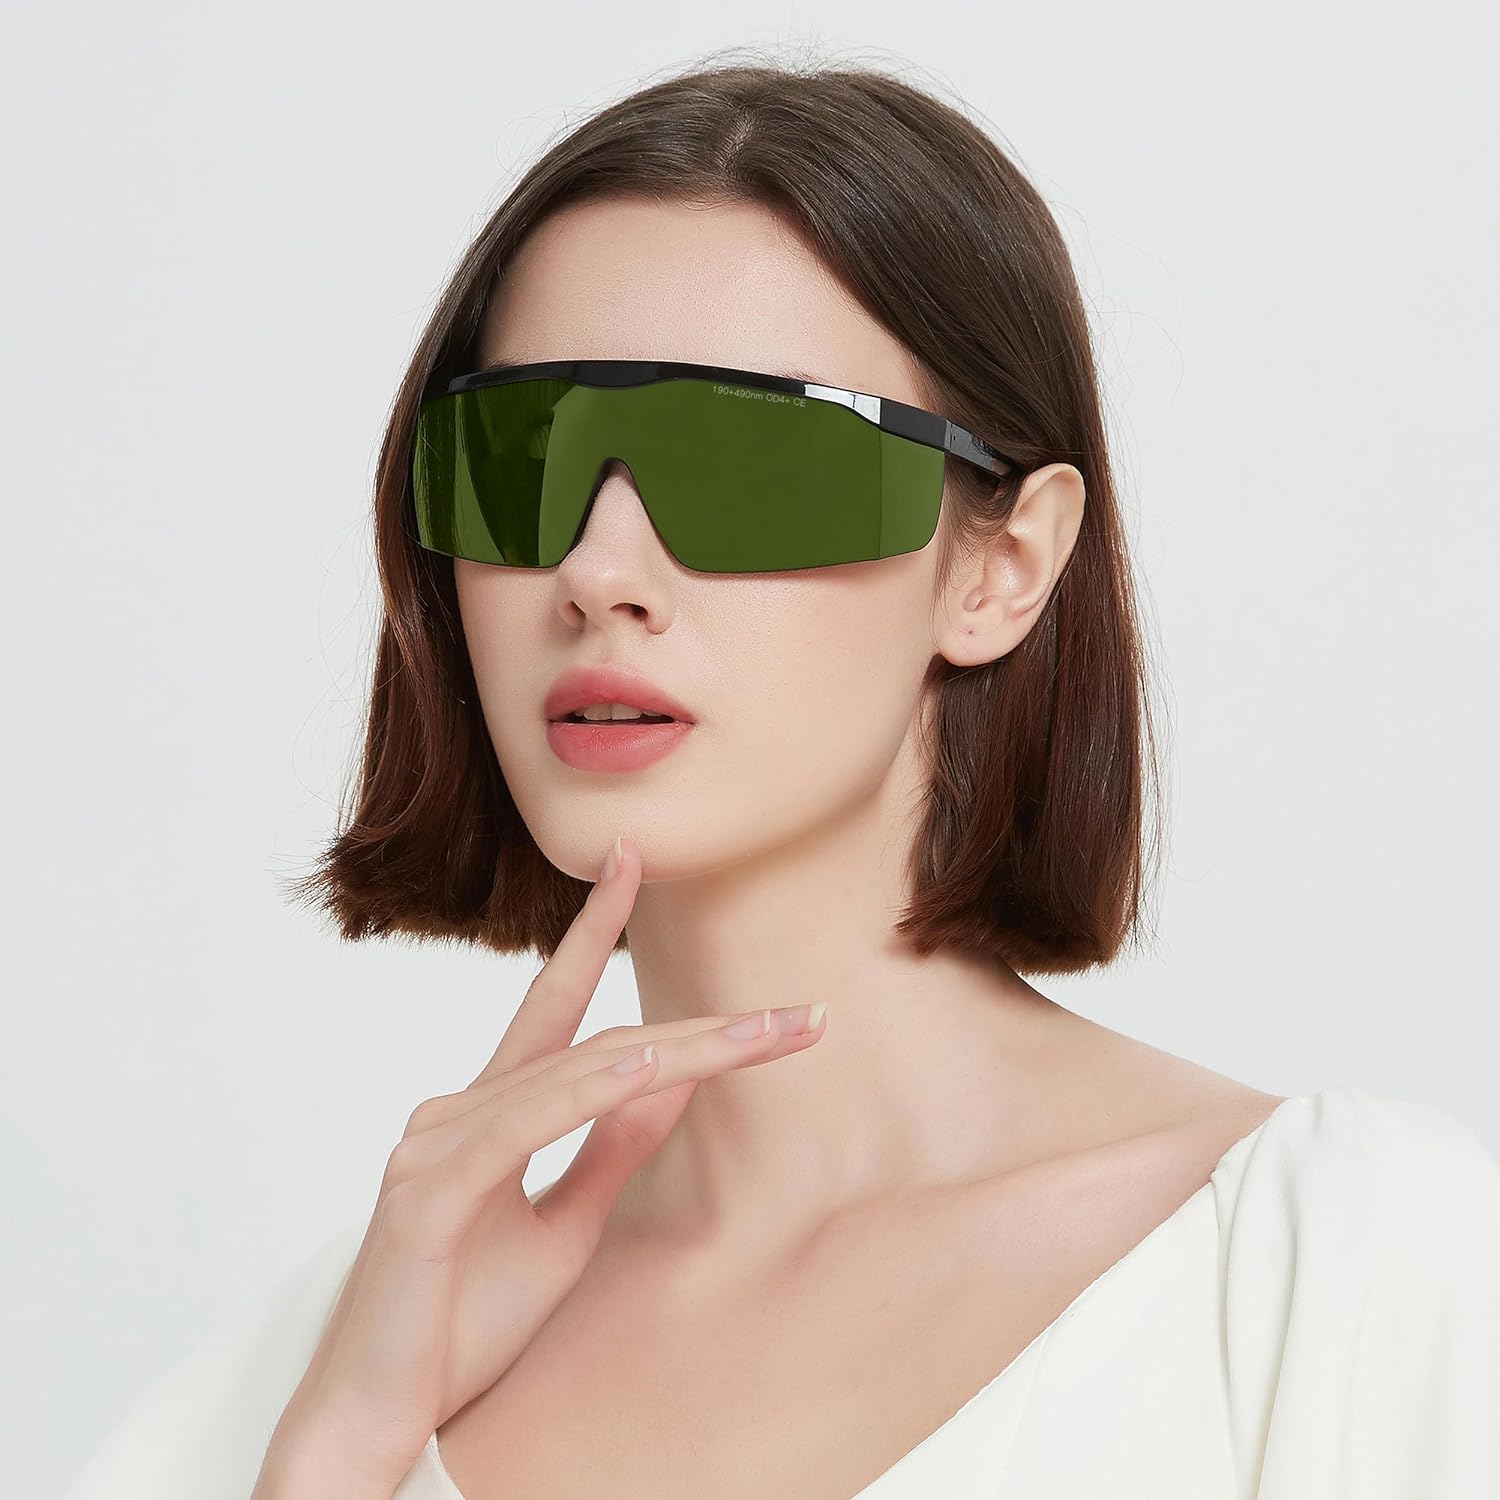 Alsenor IPL 190nm-490nm Laser Safety Glasses Goggles For Laser Cosmetology Operator Eye Protection And Laser Hair Removal Treatment